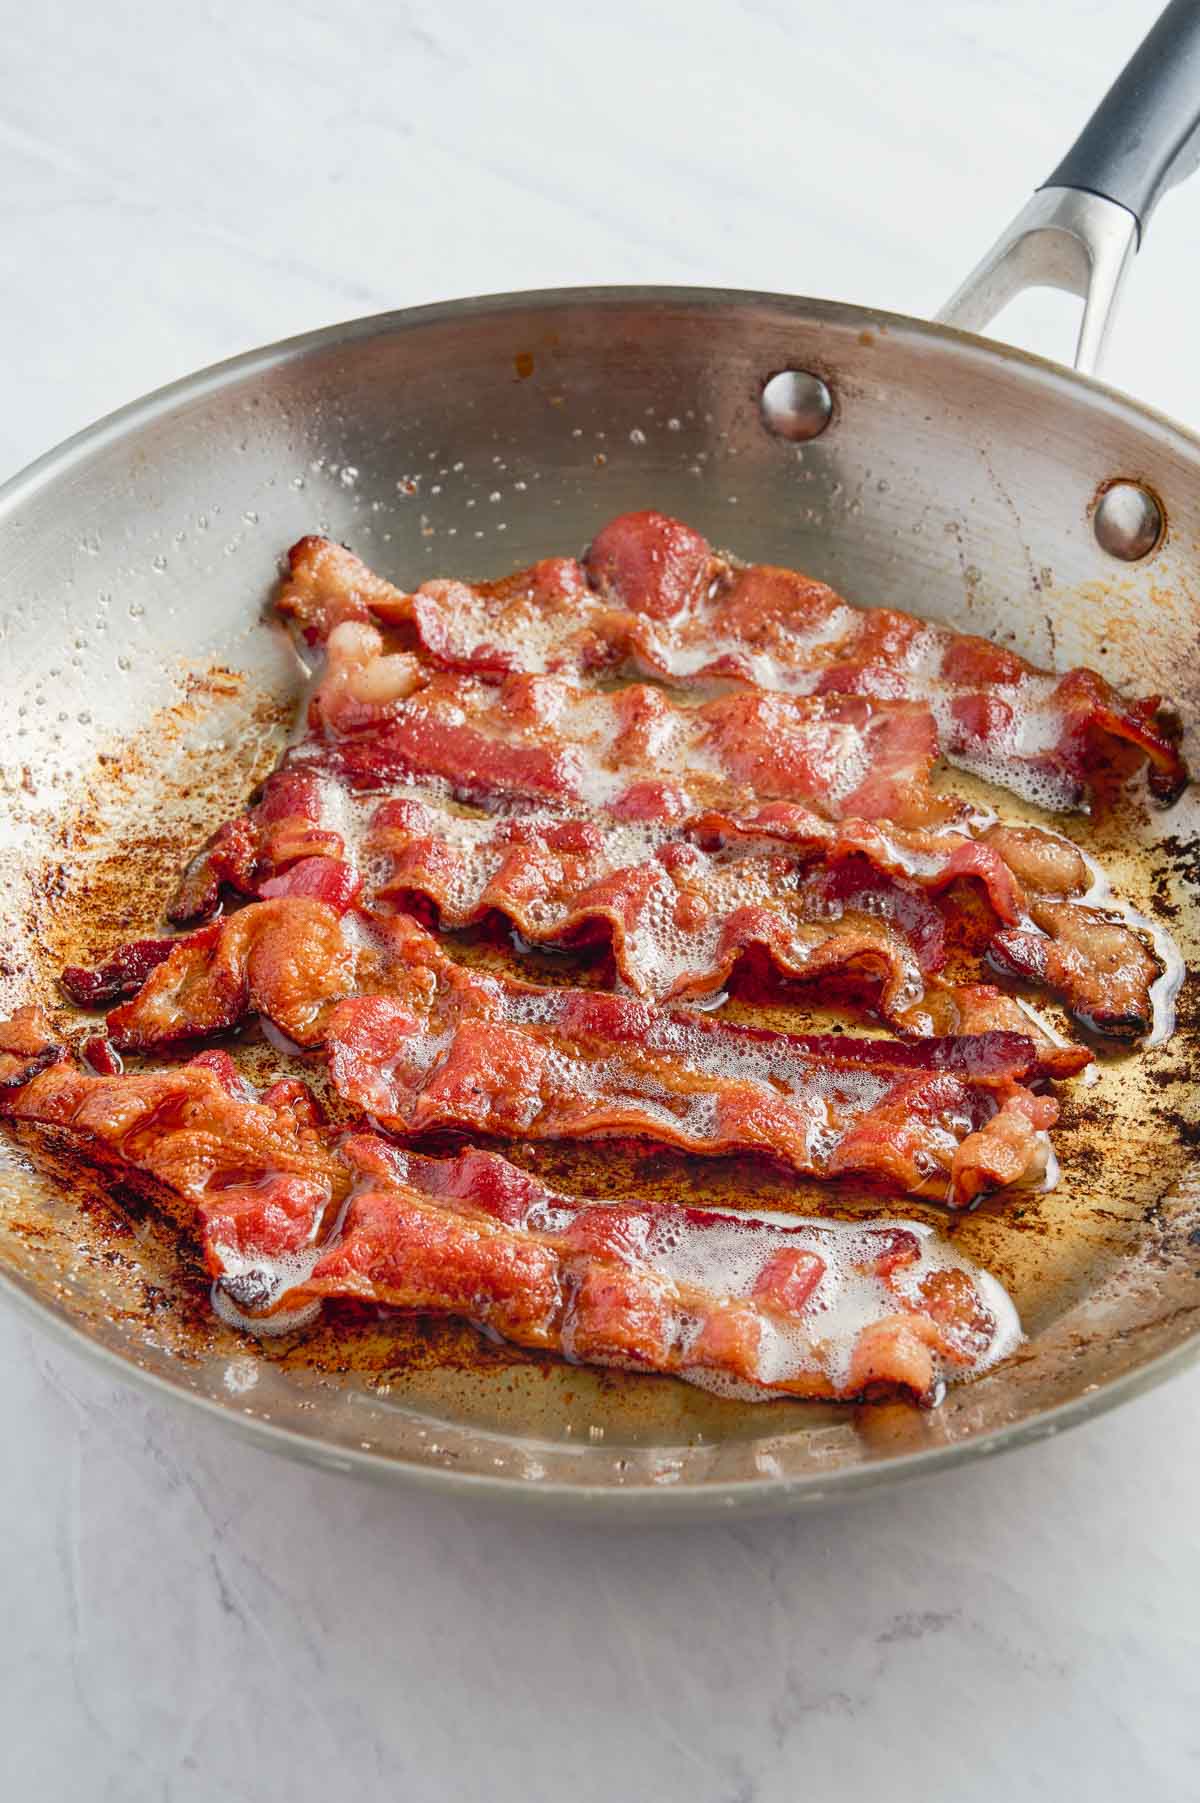 How to Cook Bacon in the Oven (No Rack!) - A Nourishing Plate